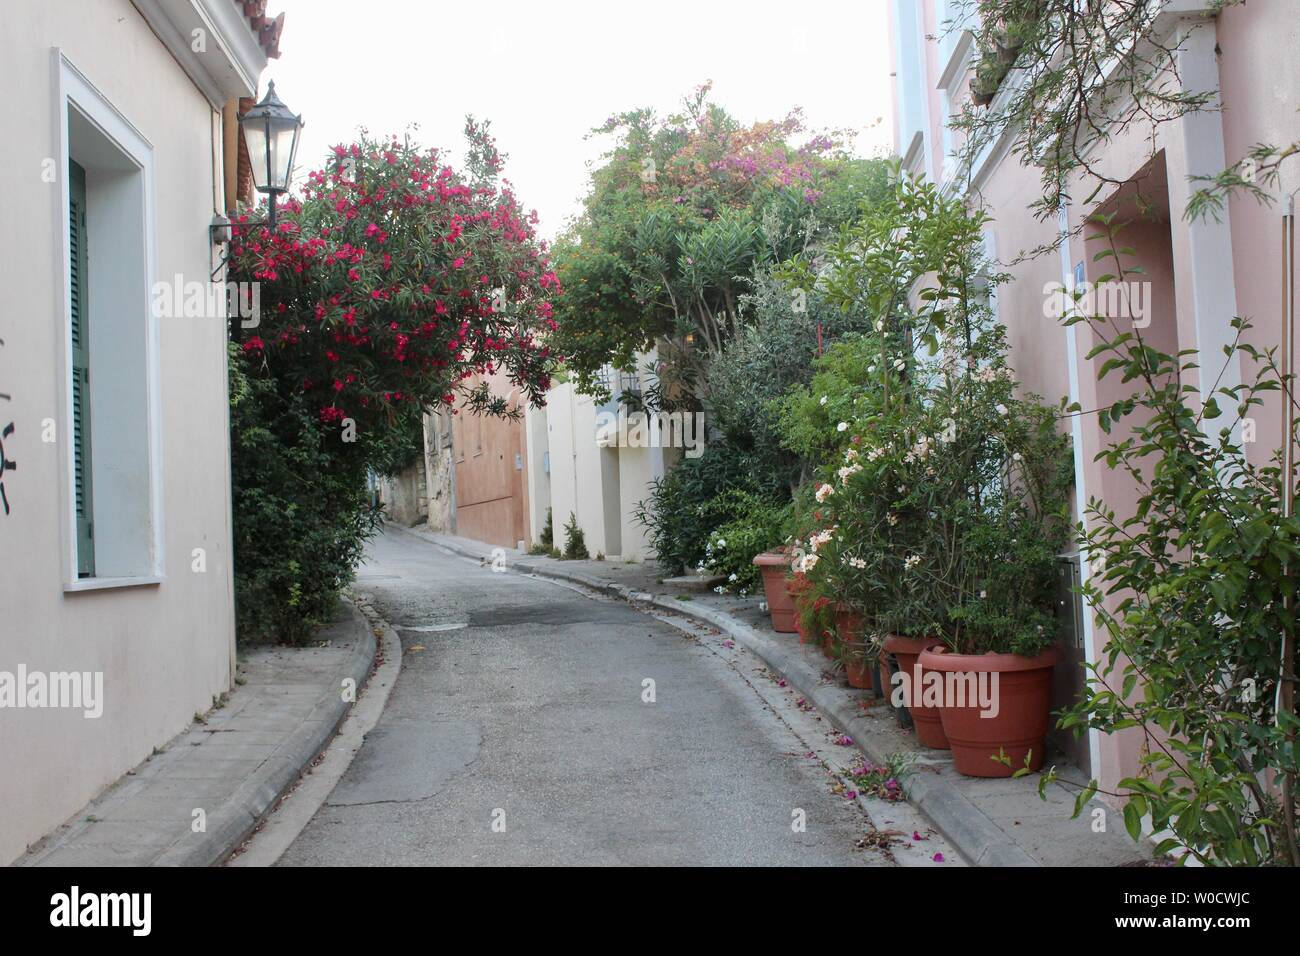 an empty quiet street in athens with shrubs and trees in pots lining the road Stock Photo